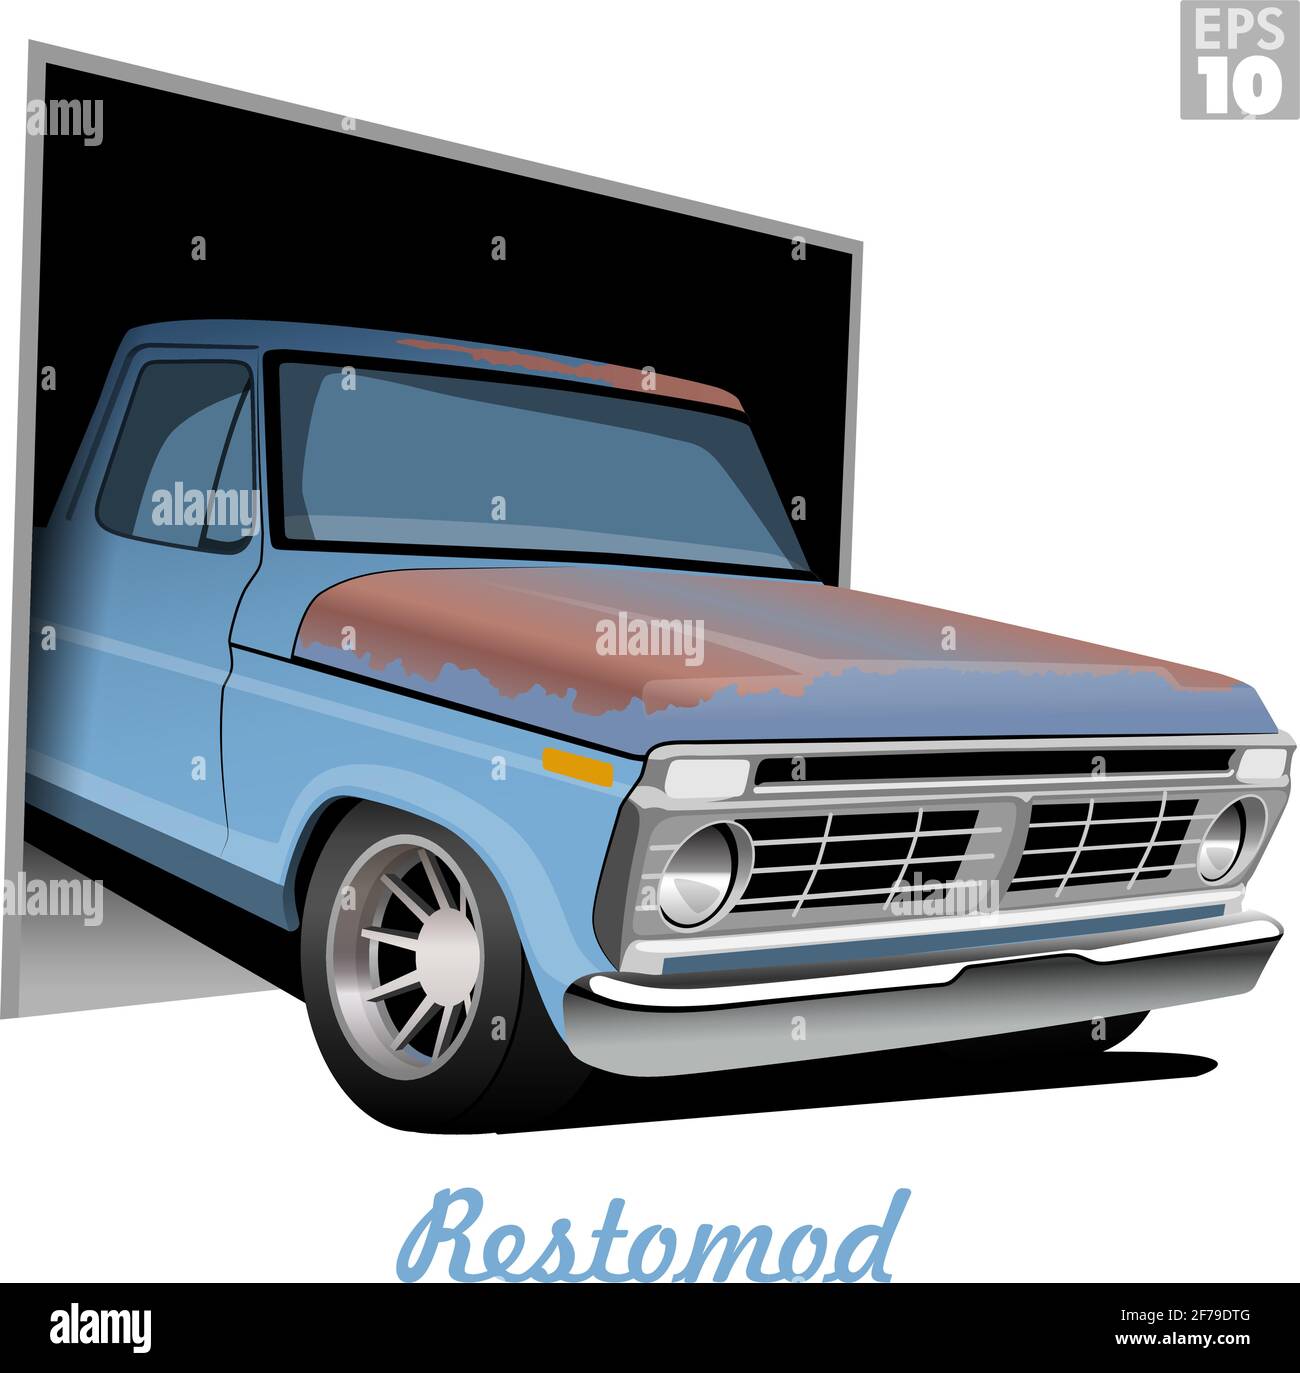 1970s American old farm truck restomod with rusted hood, a project car that is restored with modern wheels for better performance. Stock Vector